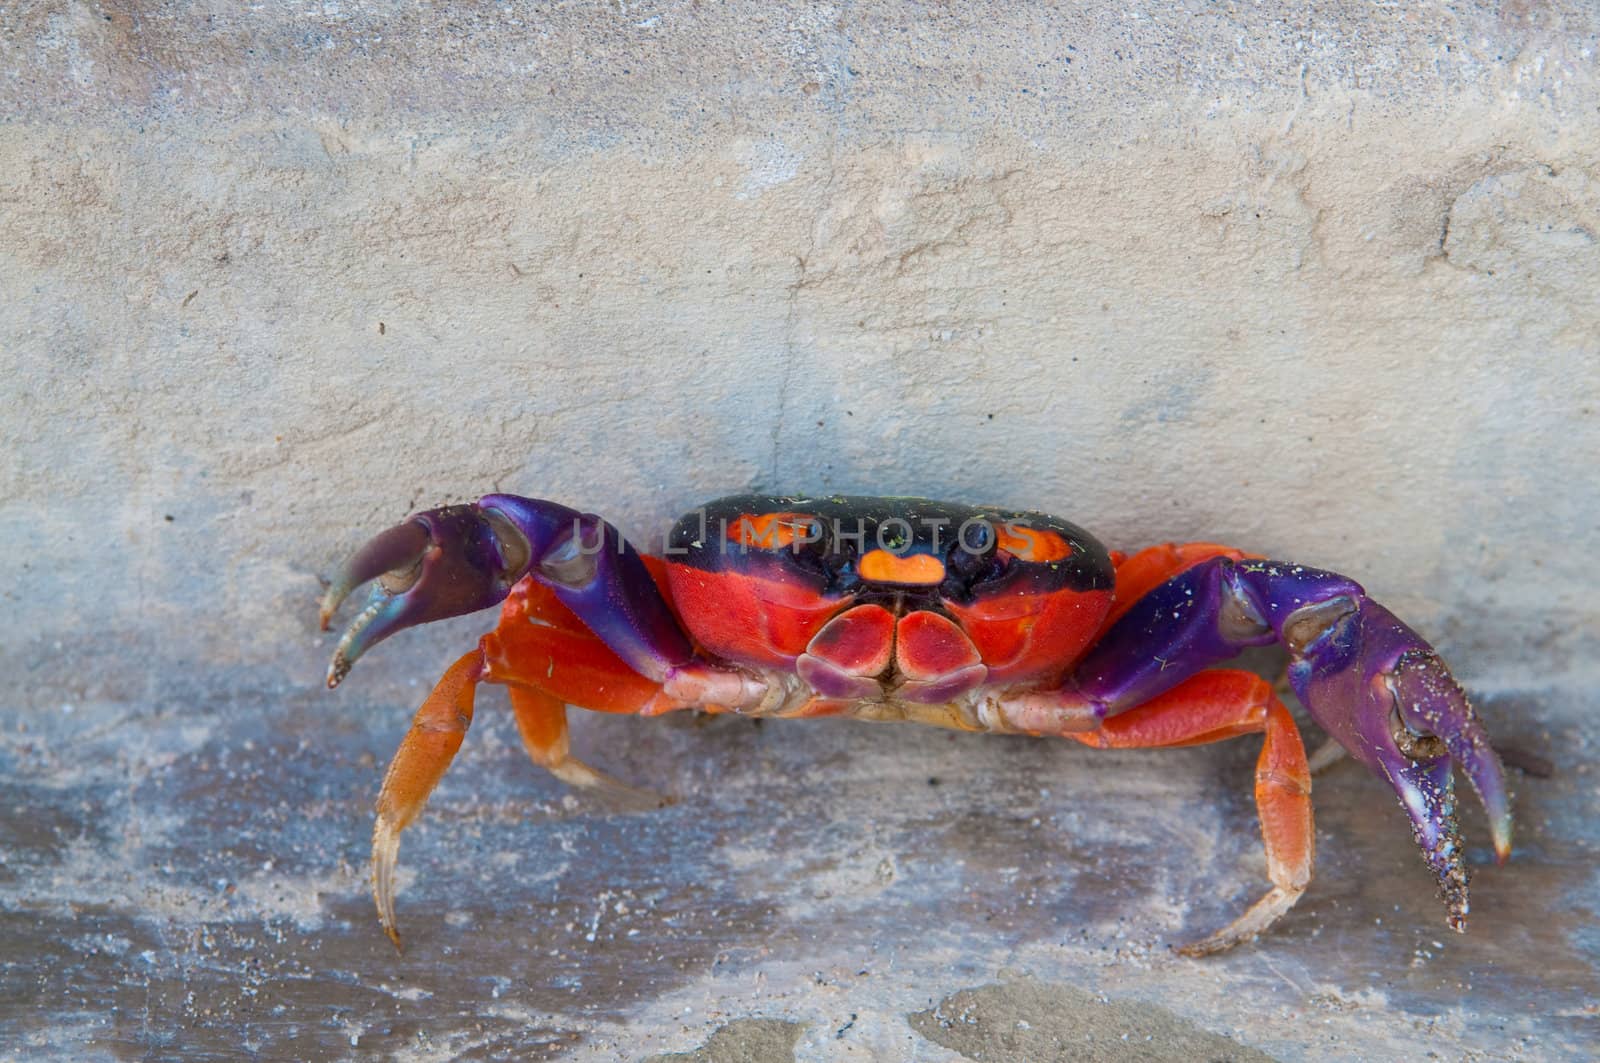 The picture of the red crab from the pacific coast